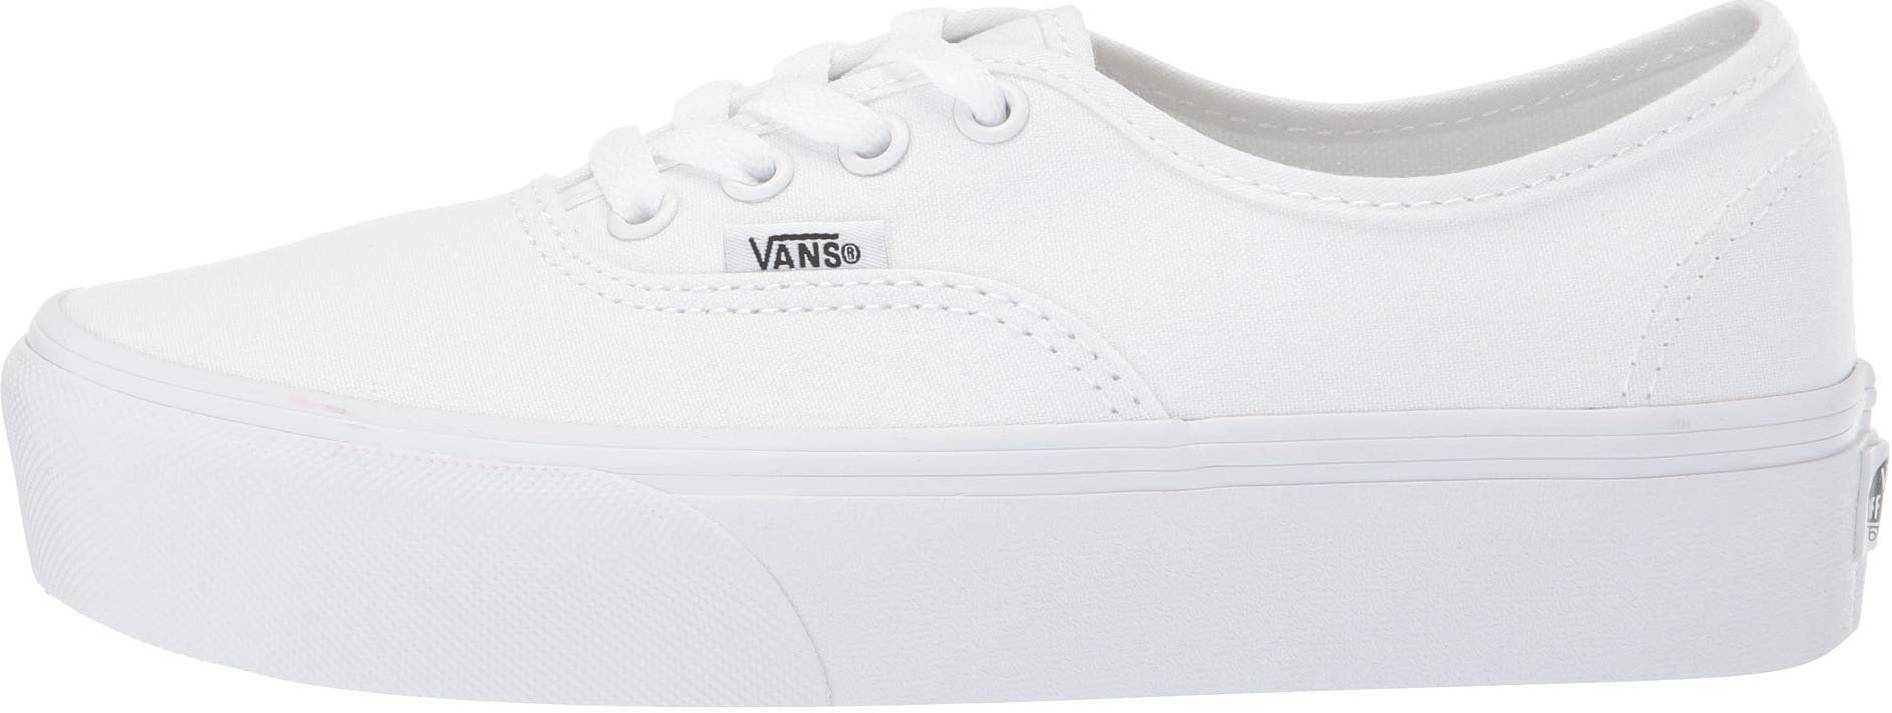 Vans Authentic Platform 2.0 sneakers in 4 colors (only $42 ...